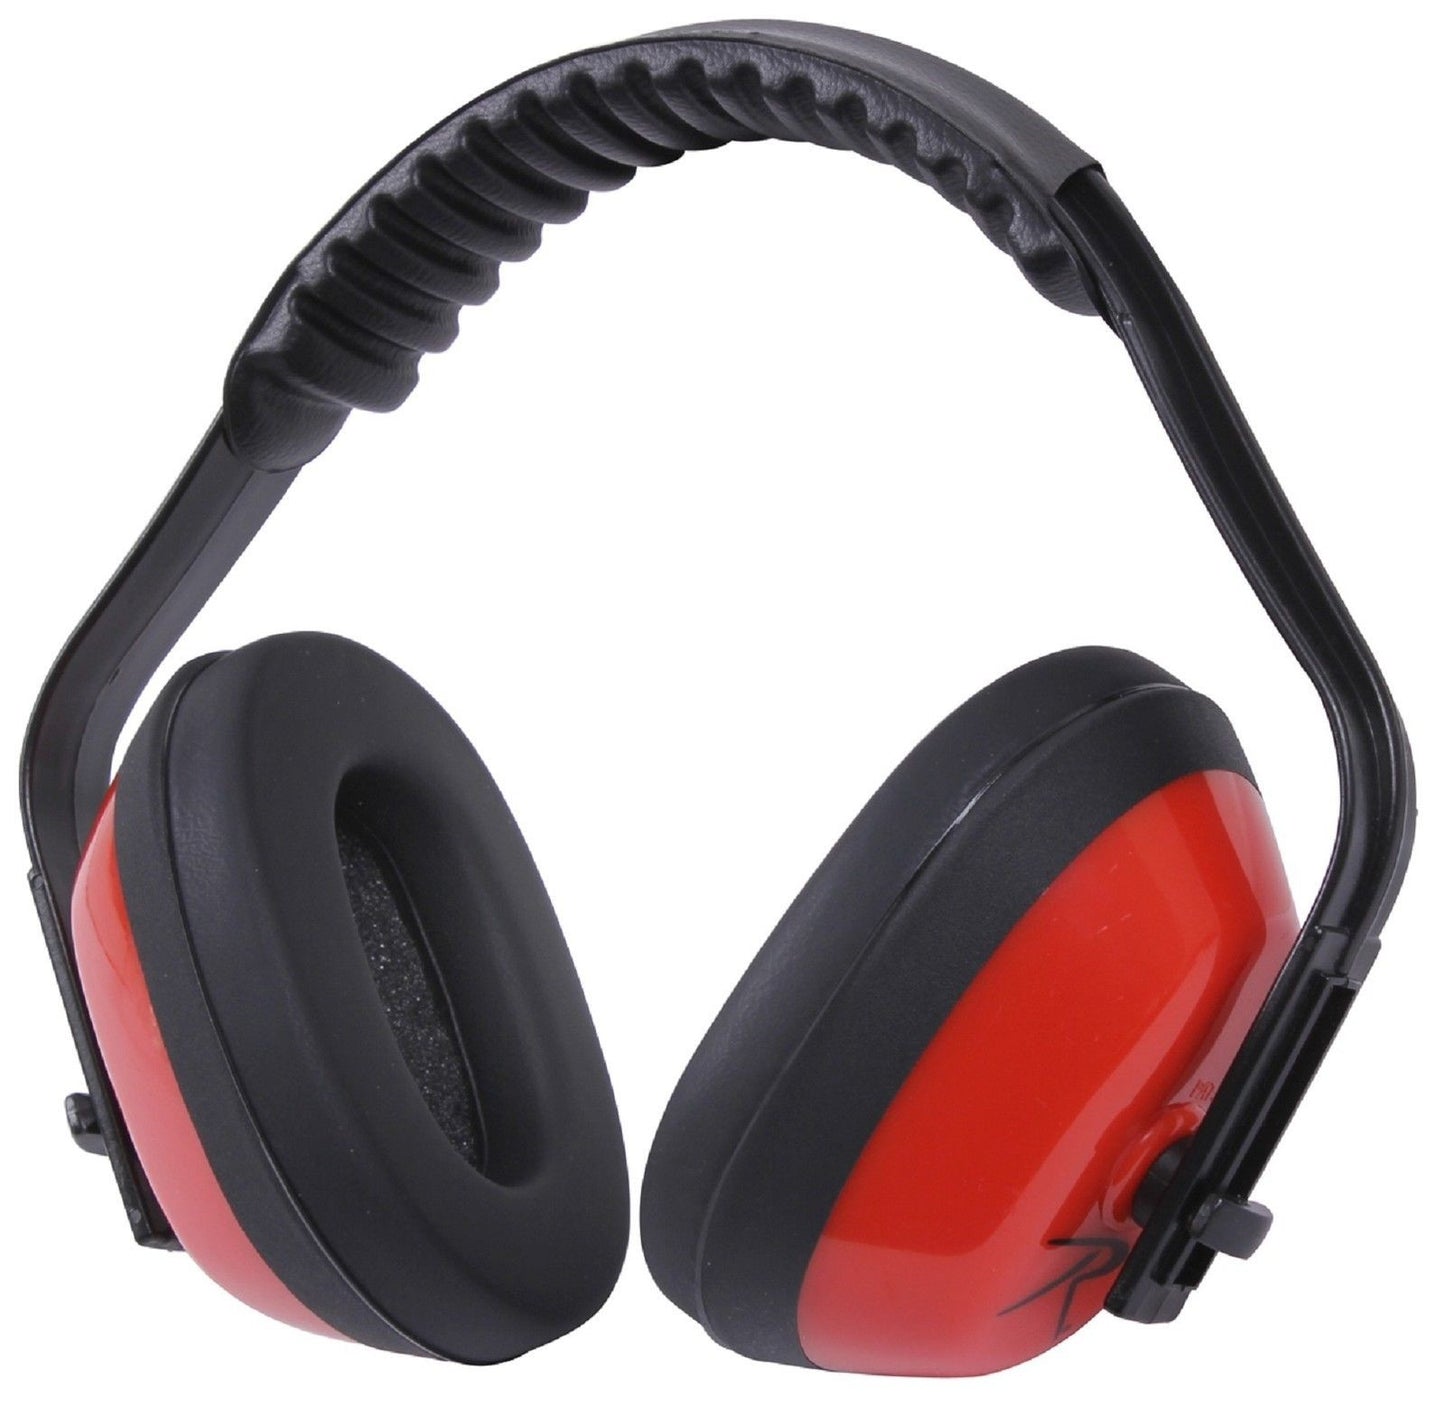 Rothco Noise Reduction Ear Muffs - Padded Adjustable Shop & Range Noise Reducers